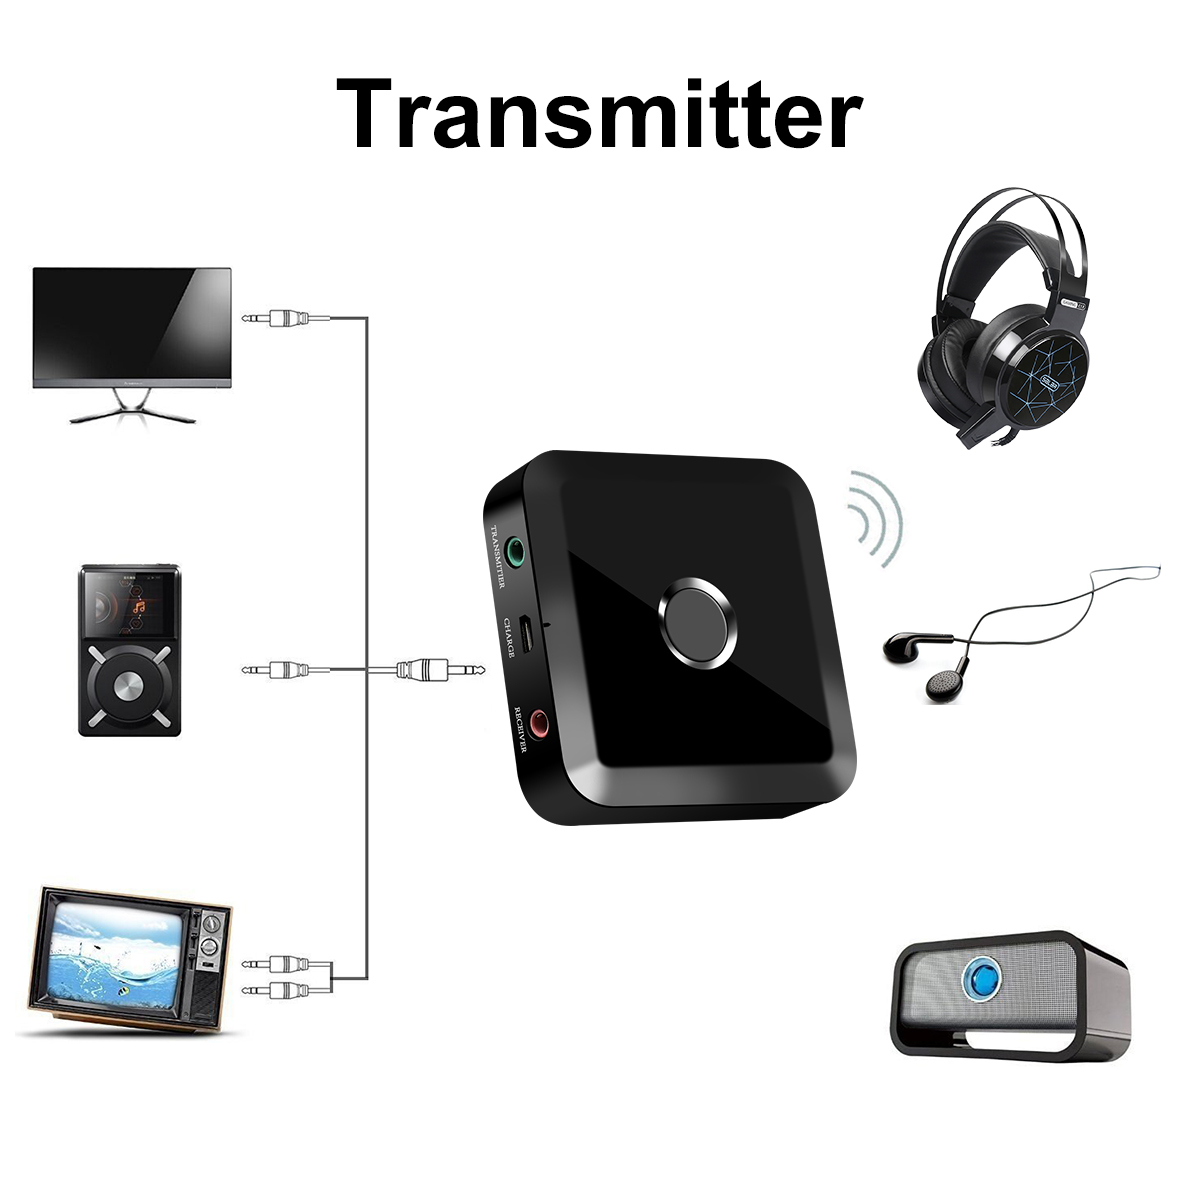 Wireless-TransmitterReceiver-bluetooth-40-Adapter-2-in-1-Wireless-35mm--RCA-Audio-Adapter-for-TV-Hea-1890700-2